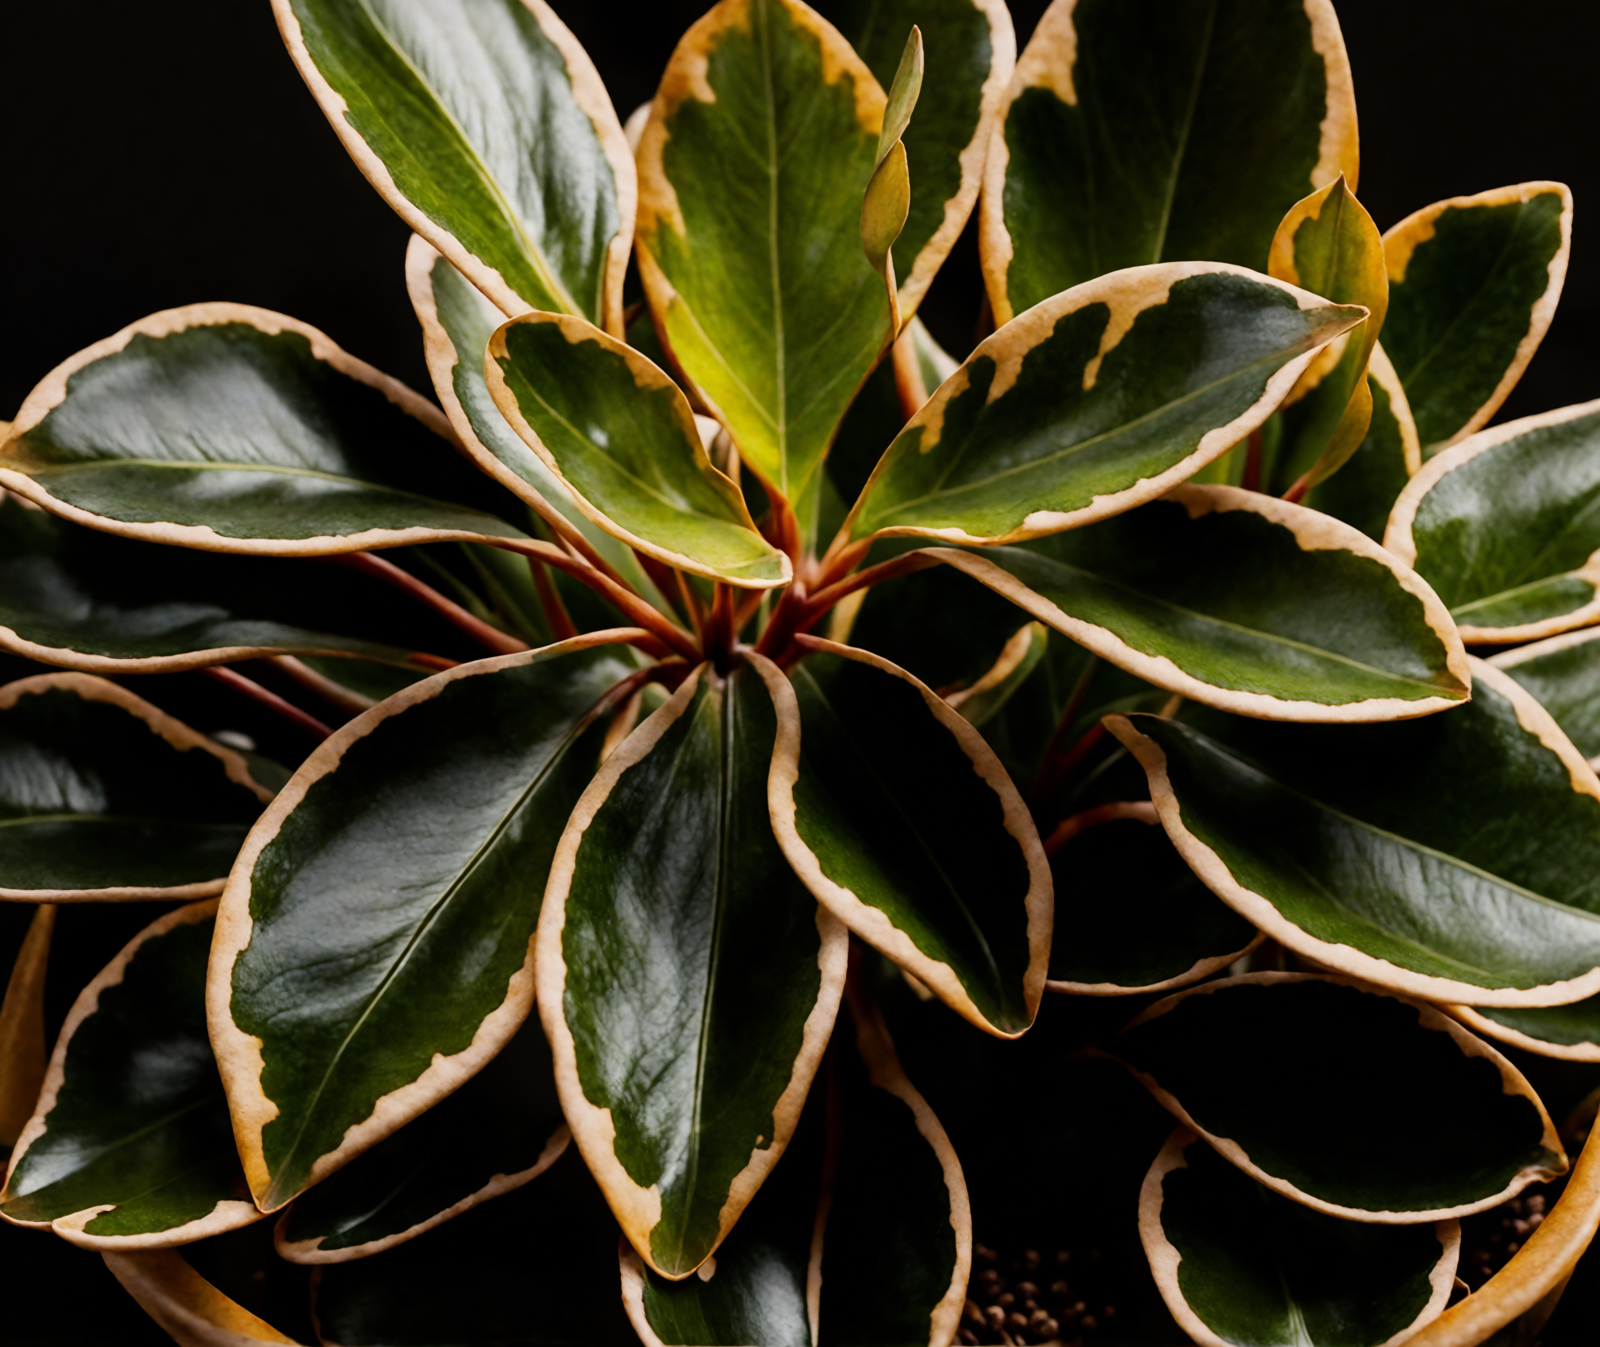 Peperomia clusiifolia with lush leaves in a planter, clear indoor lighting, against a dark background.